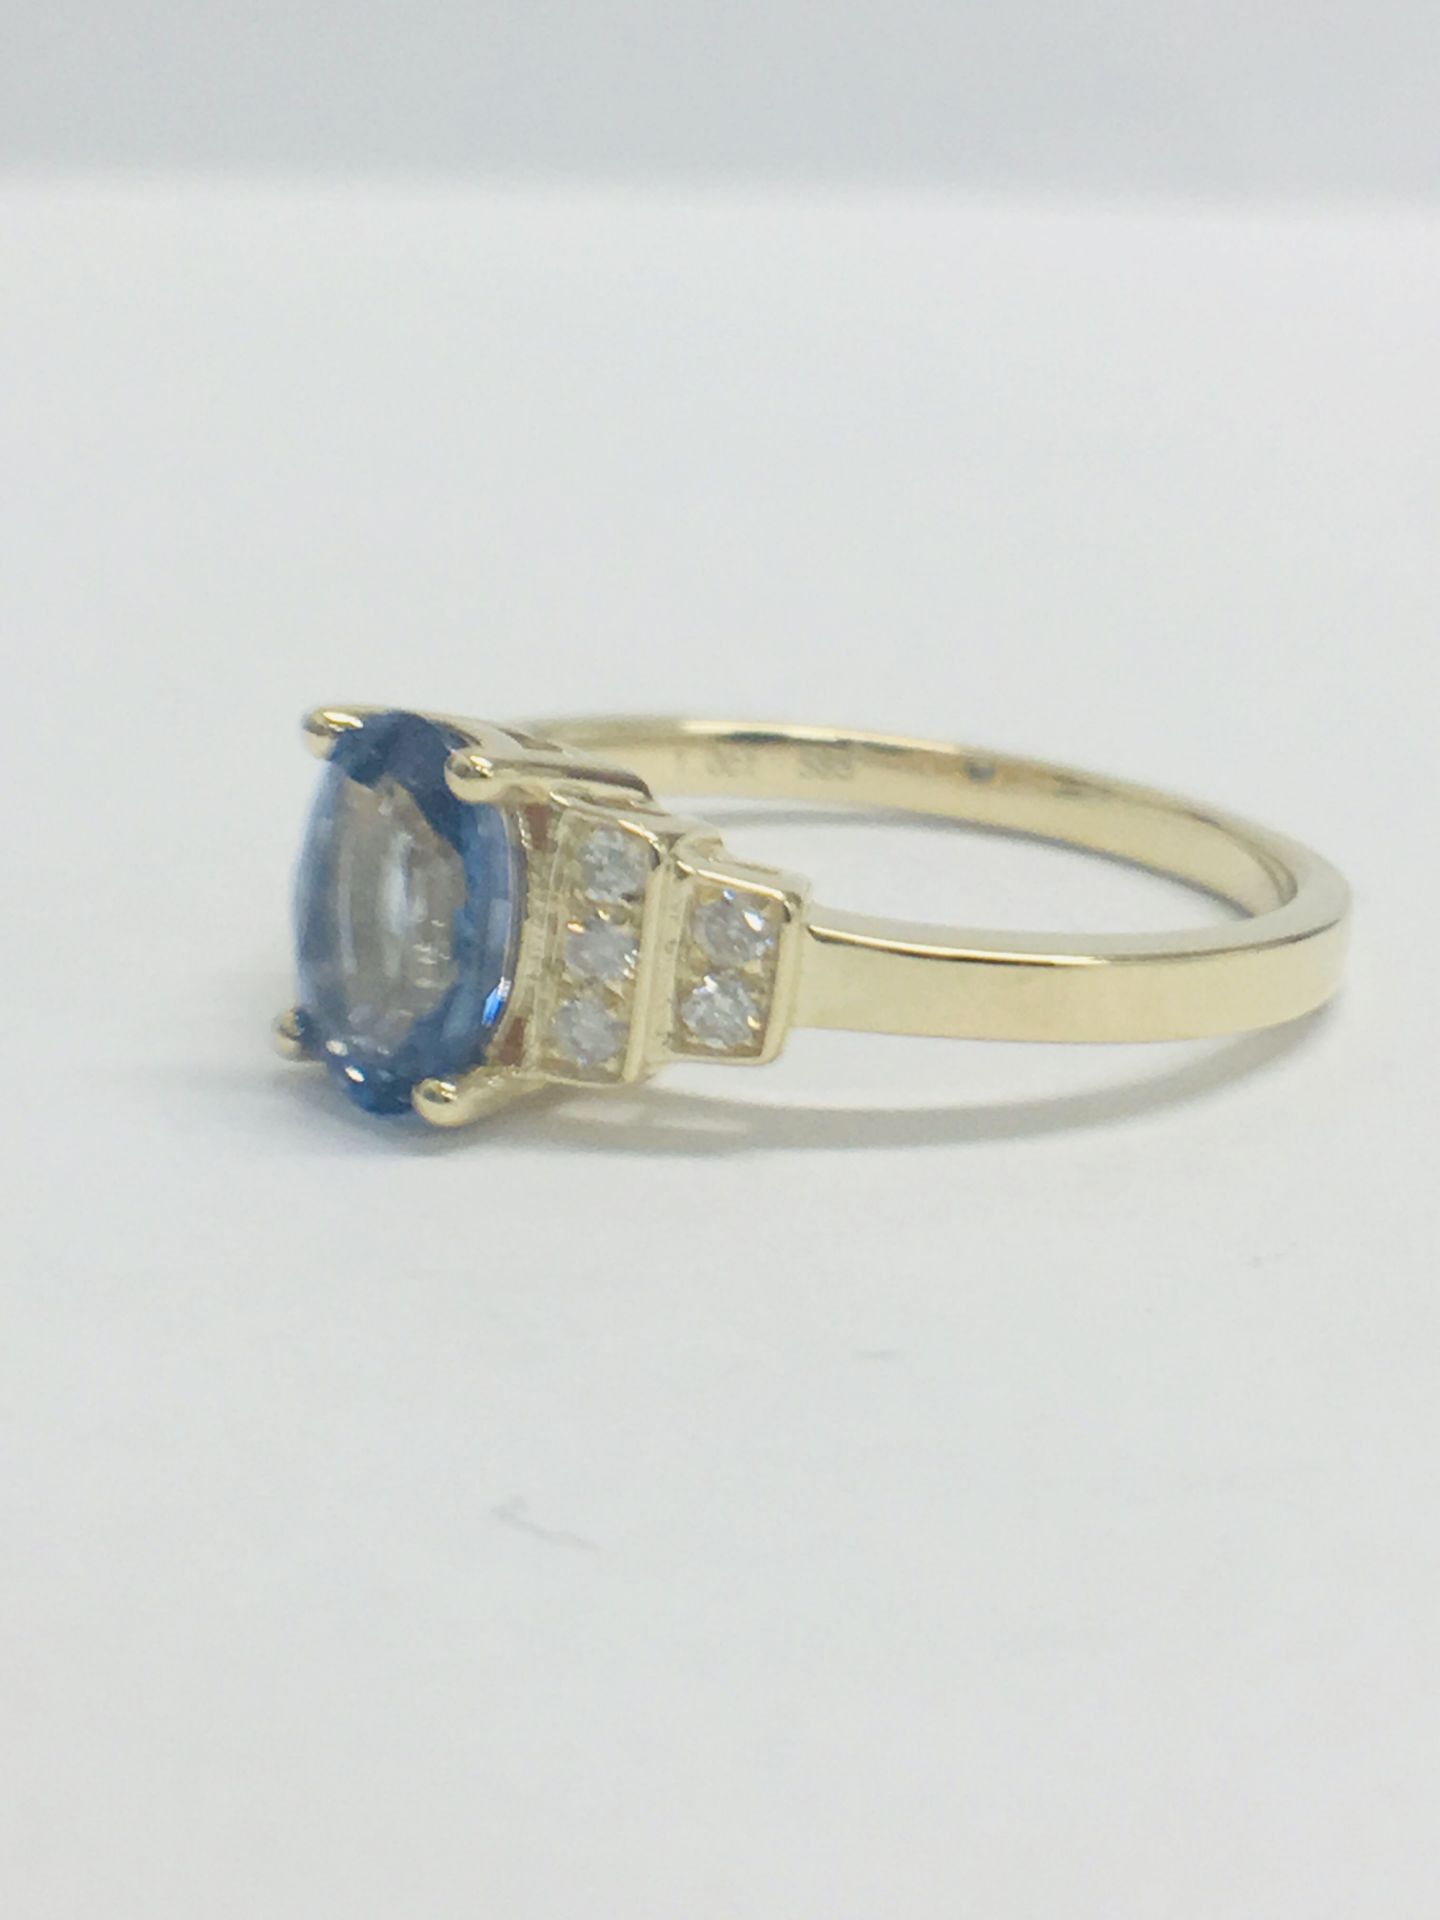 14ct Yellow Gold Sapphire and Diamond Ring. - Image 2 of 10